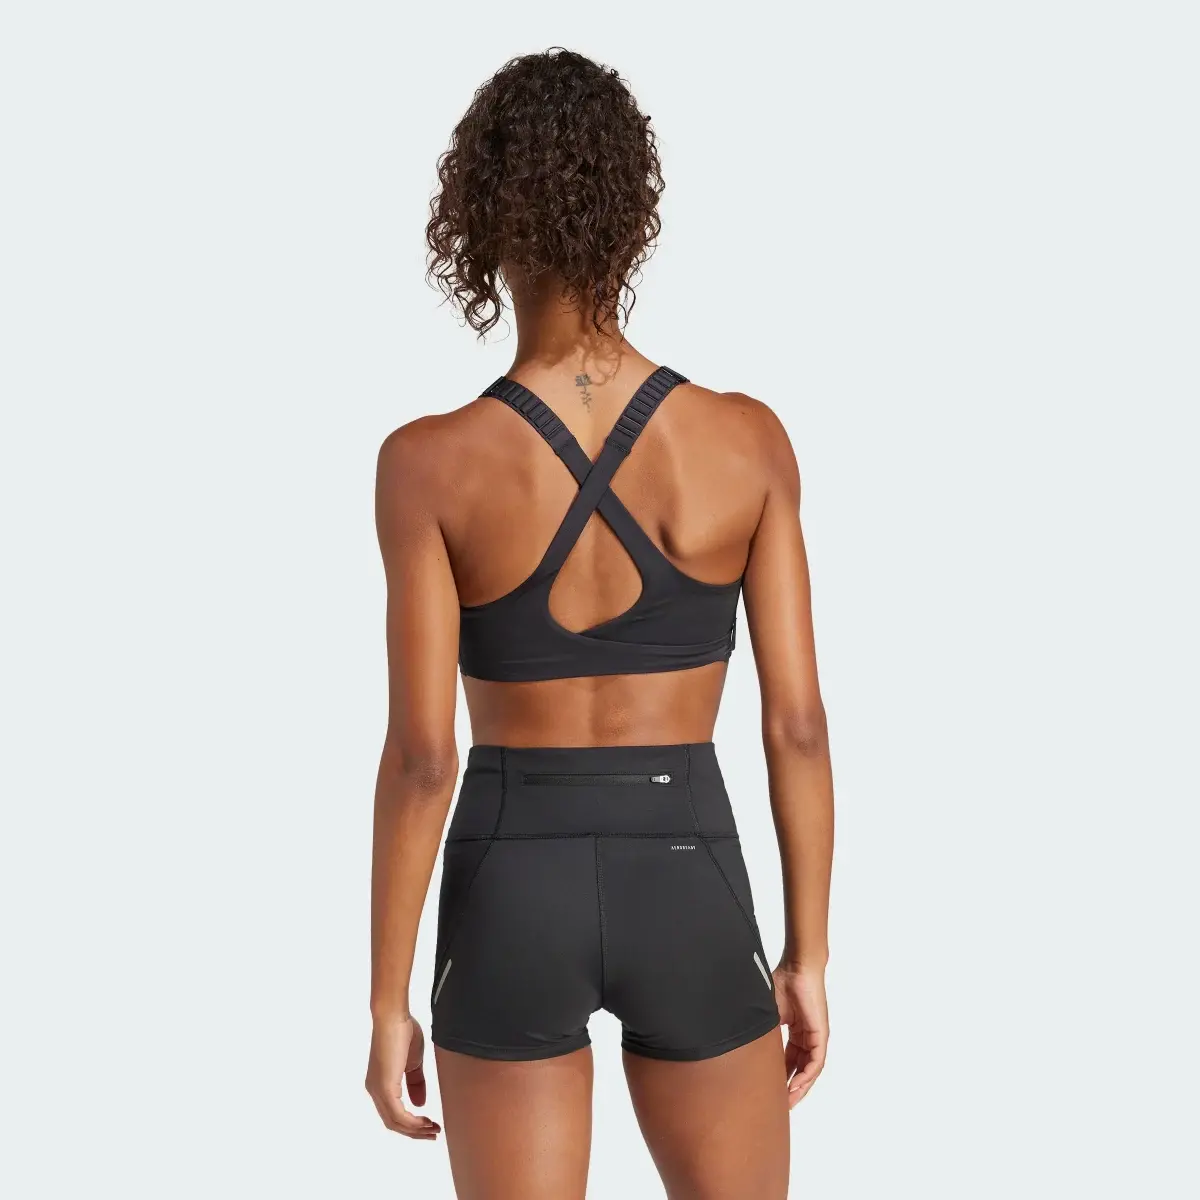 Adidas Brassière FastImpact Luxe Run Maintien fort. 3